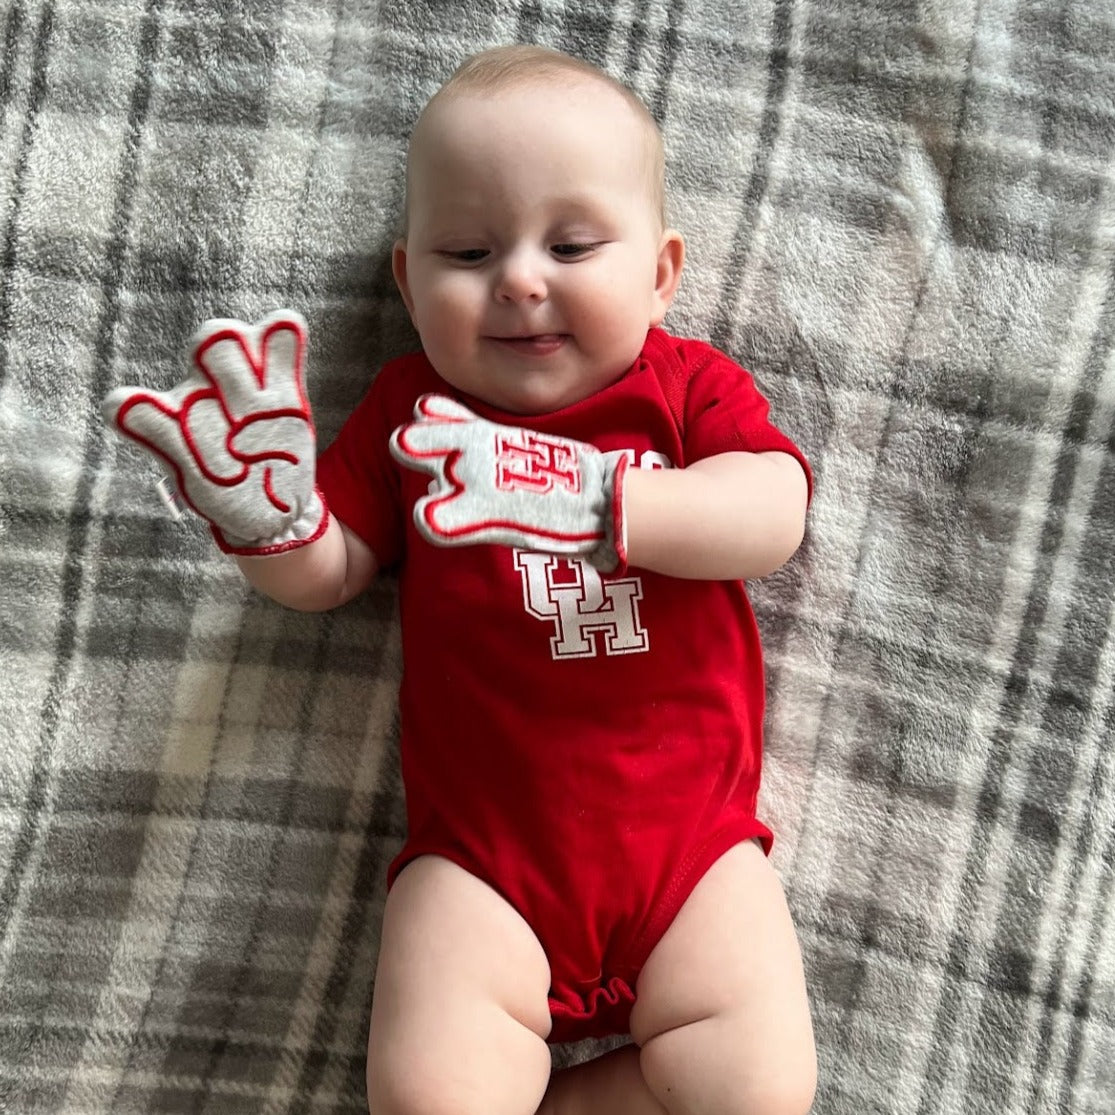 Infant wearing Houston Go Coogs baby mittens in gray